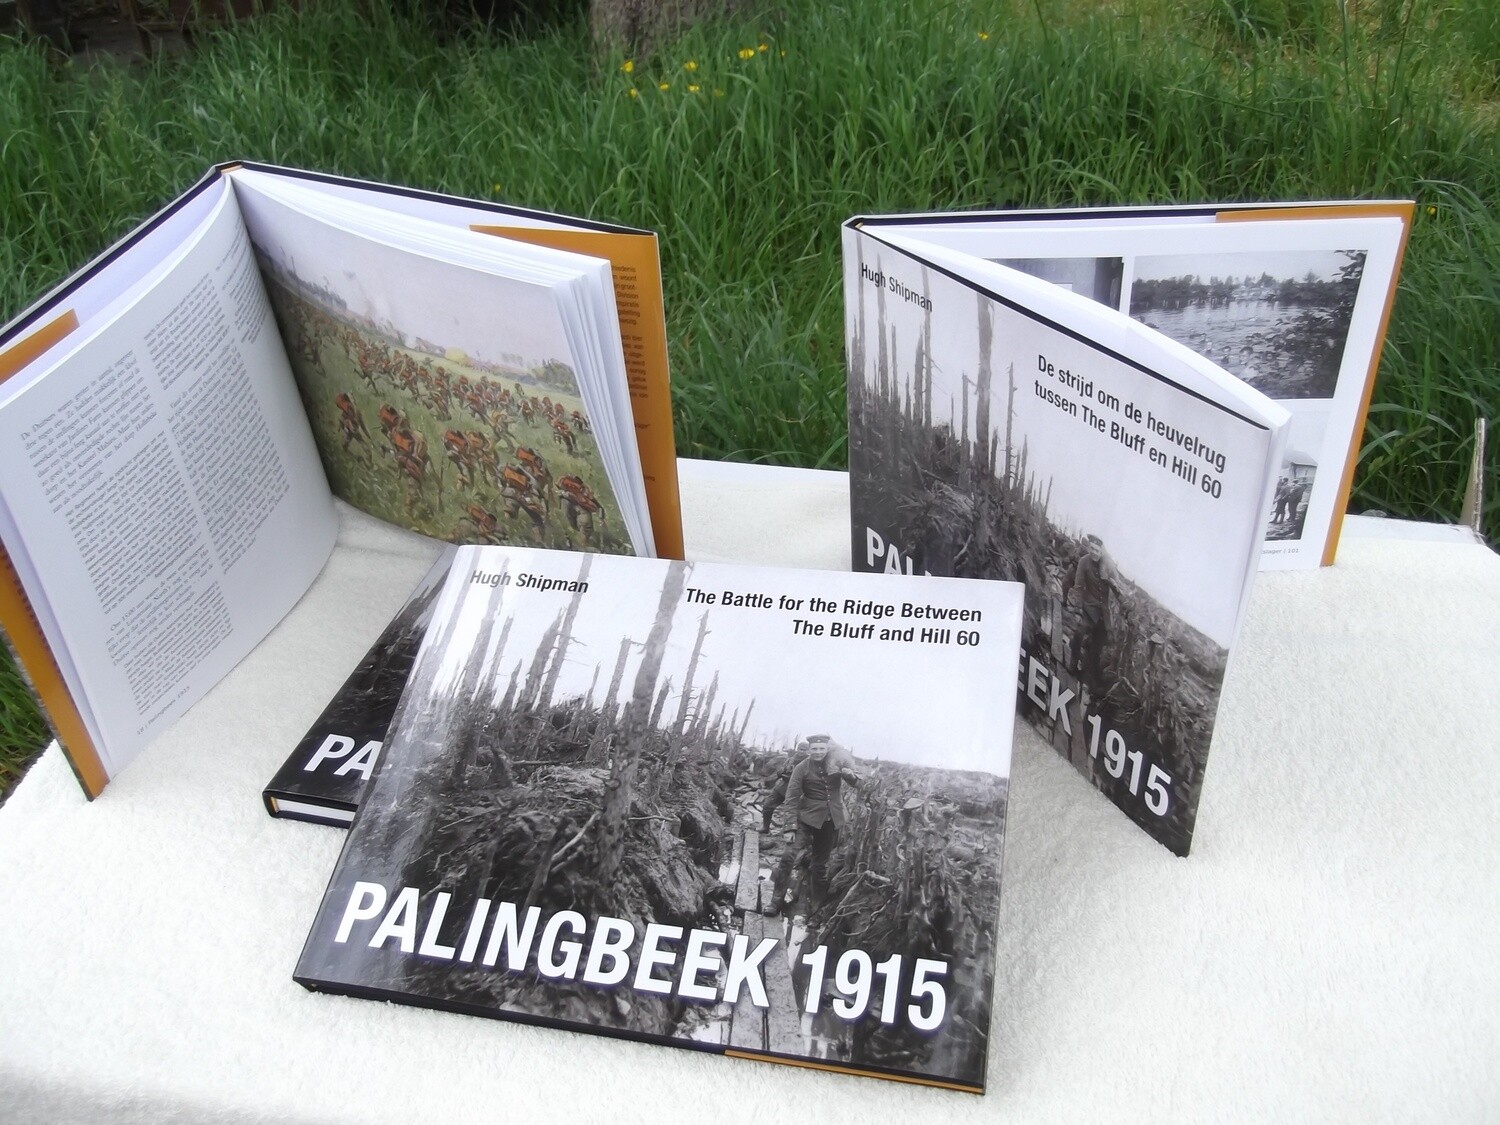 Palingbeek 1915
The battle for the ridge between The Bluff and Hill 60